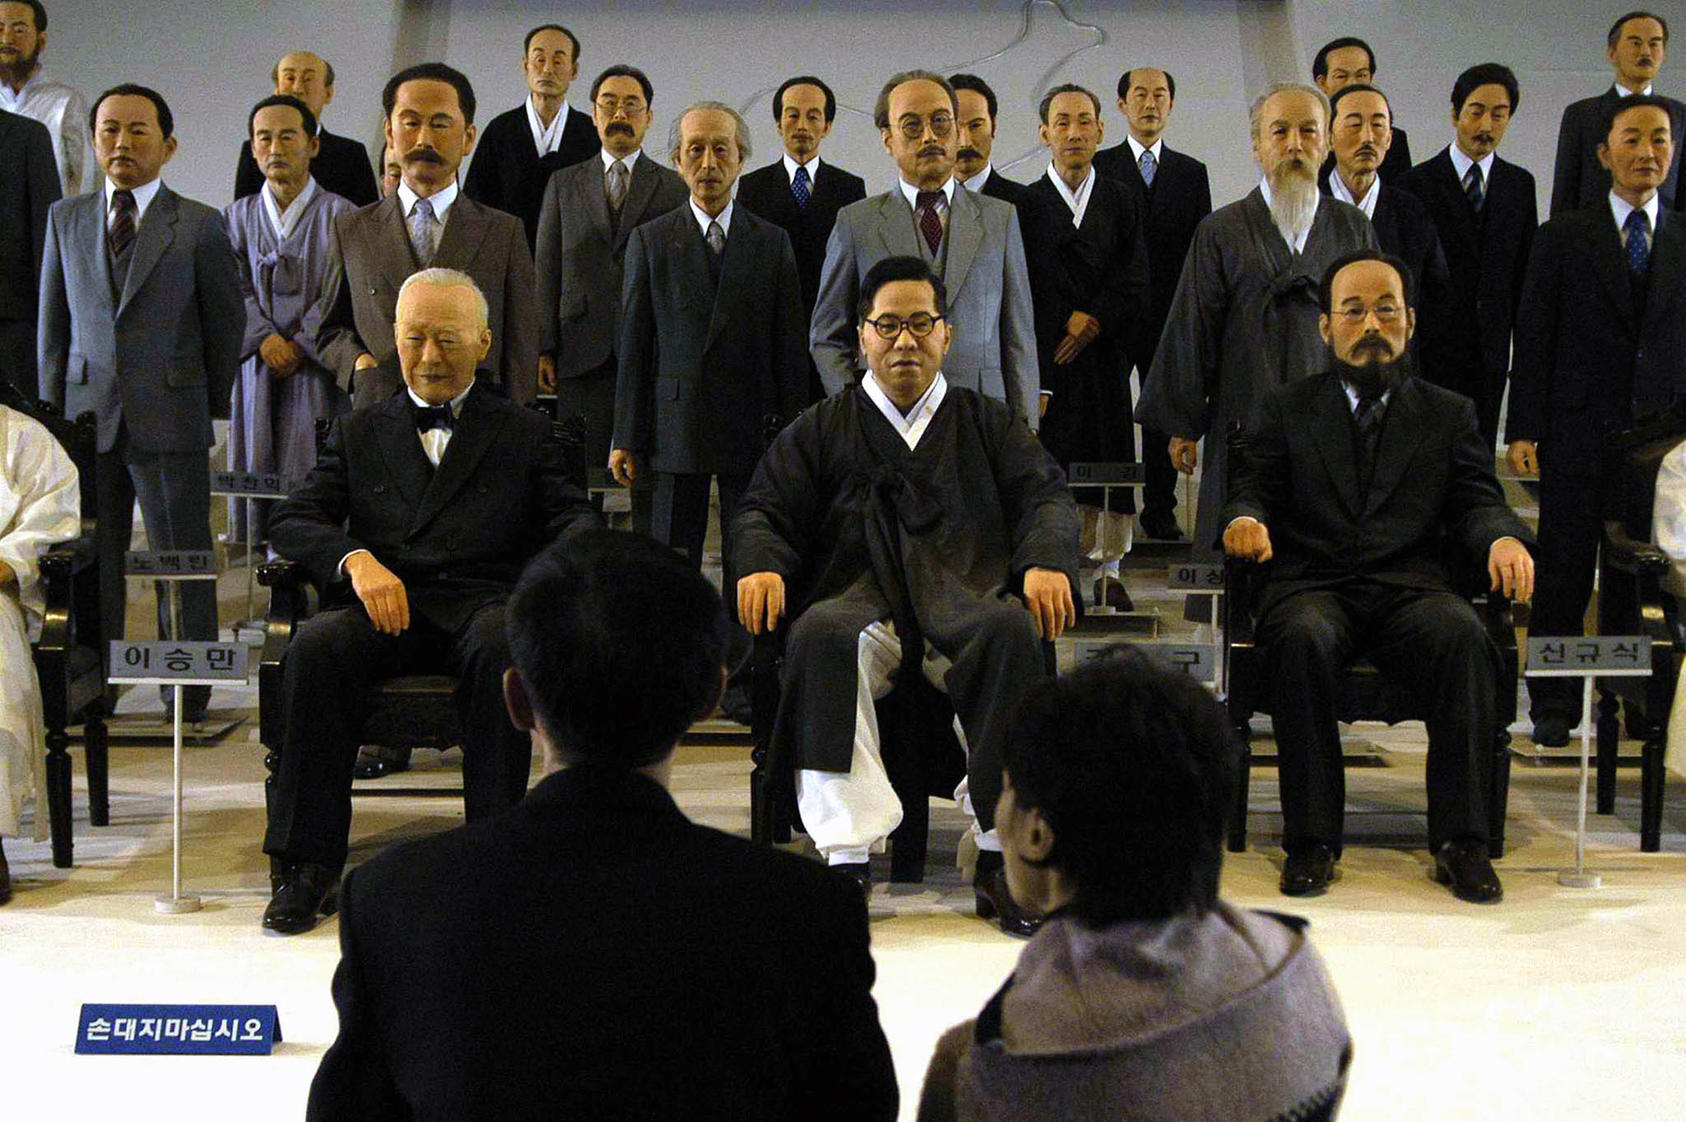 Visitors look at a display of life-size models of Koreans who resisted Japanese imperialism in Cheonan, South Korea, on Dec. 8, 2004. (Seokyong Lee/The New York Times)